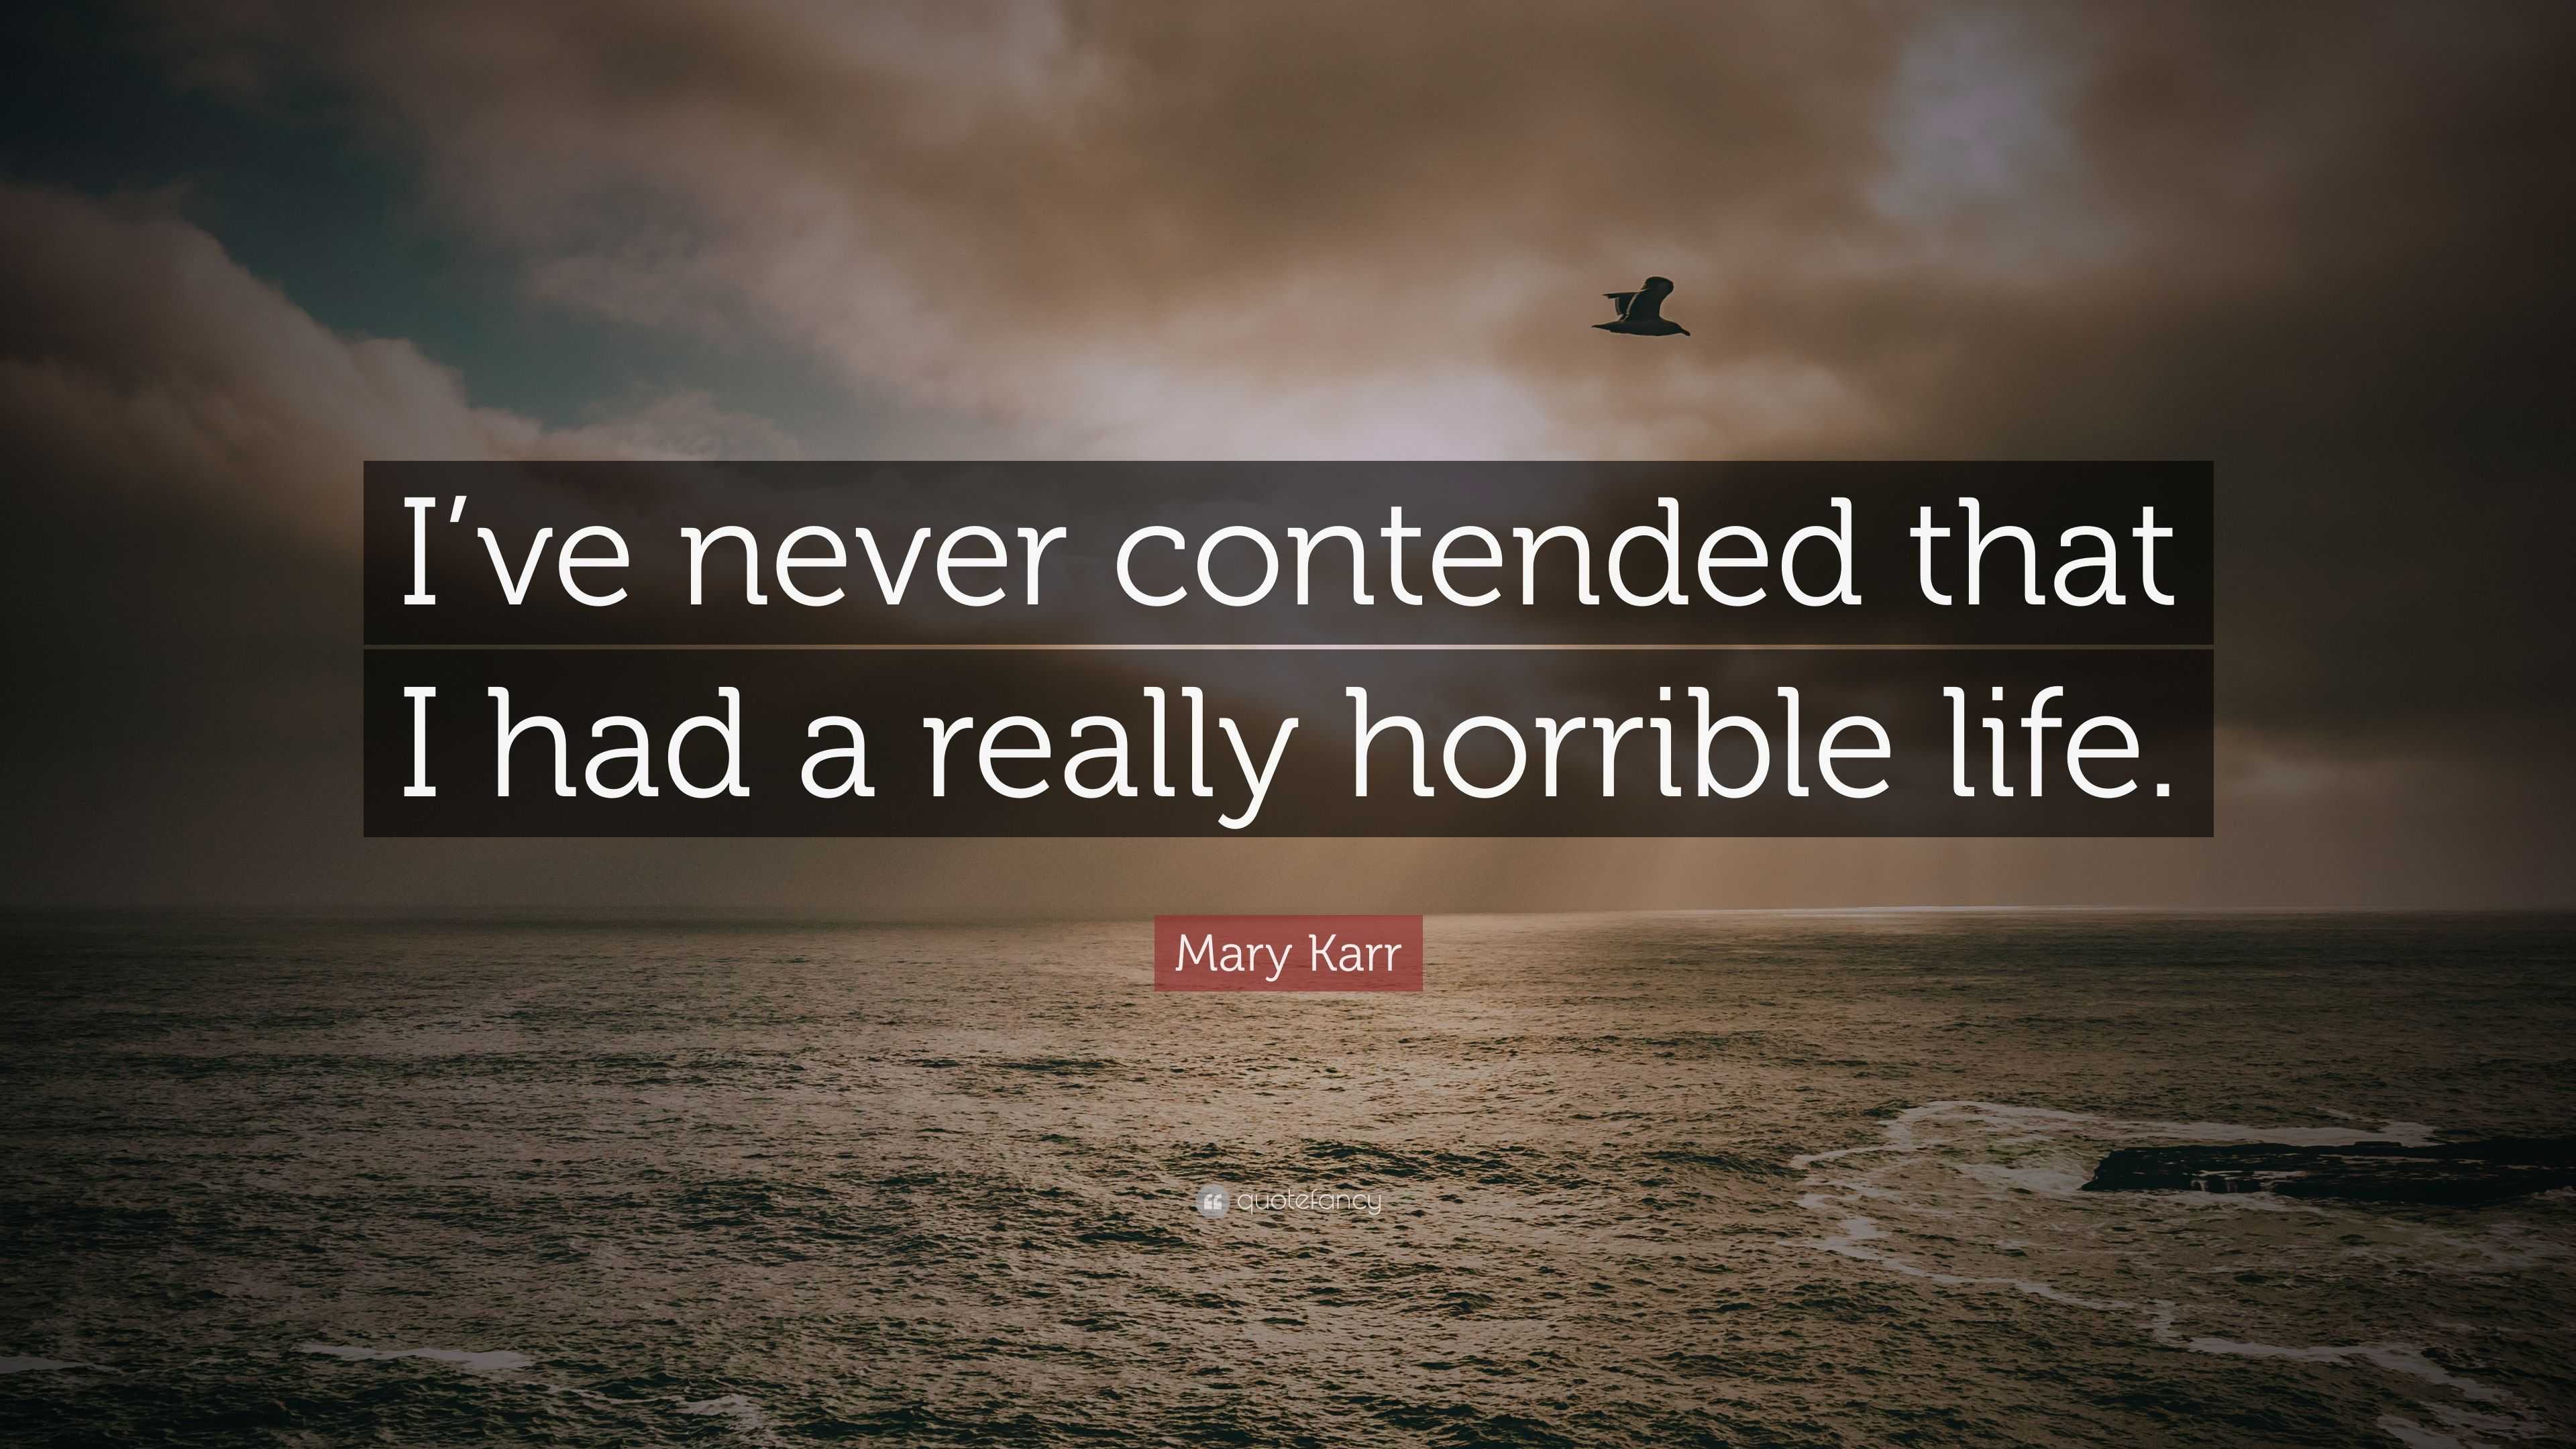 Mary Karr Quote: “I’ve never contended that I had a really horrible life.”